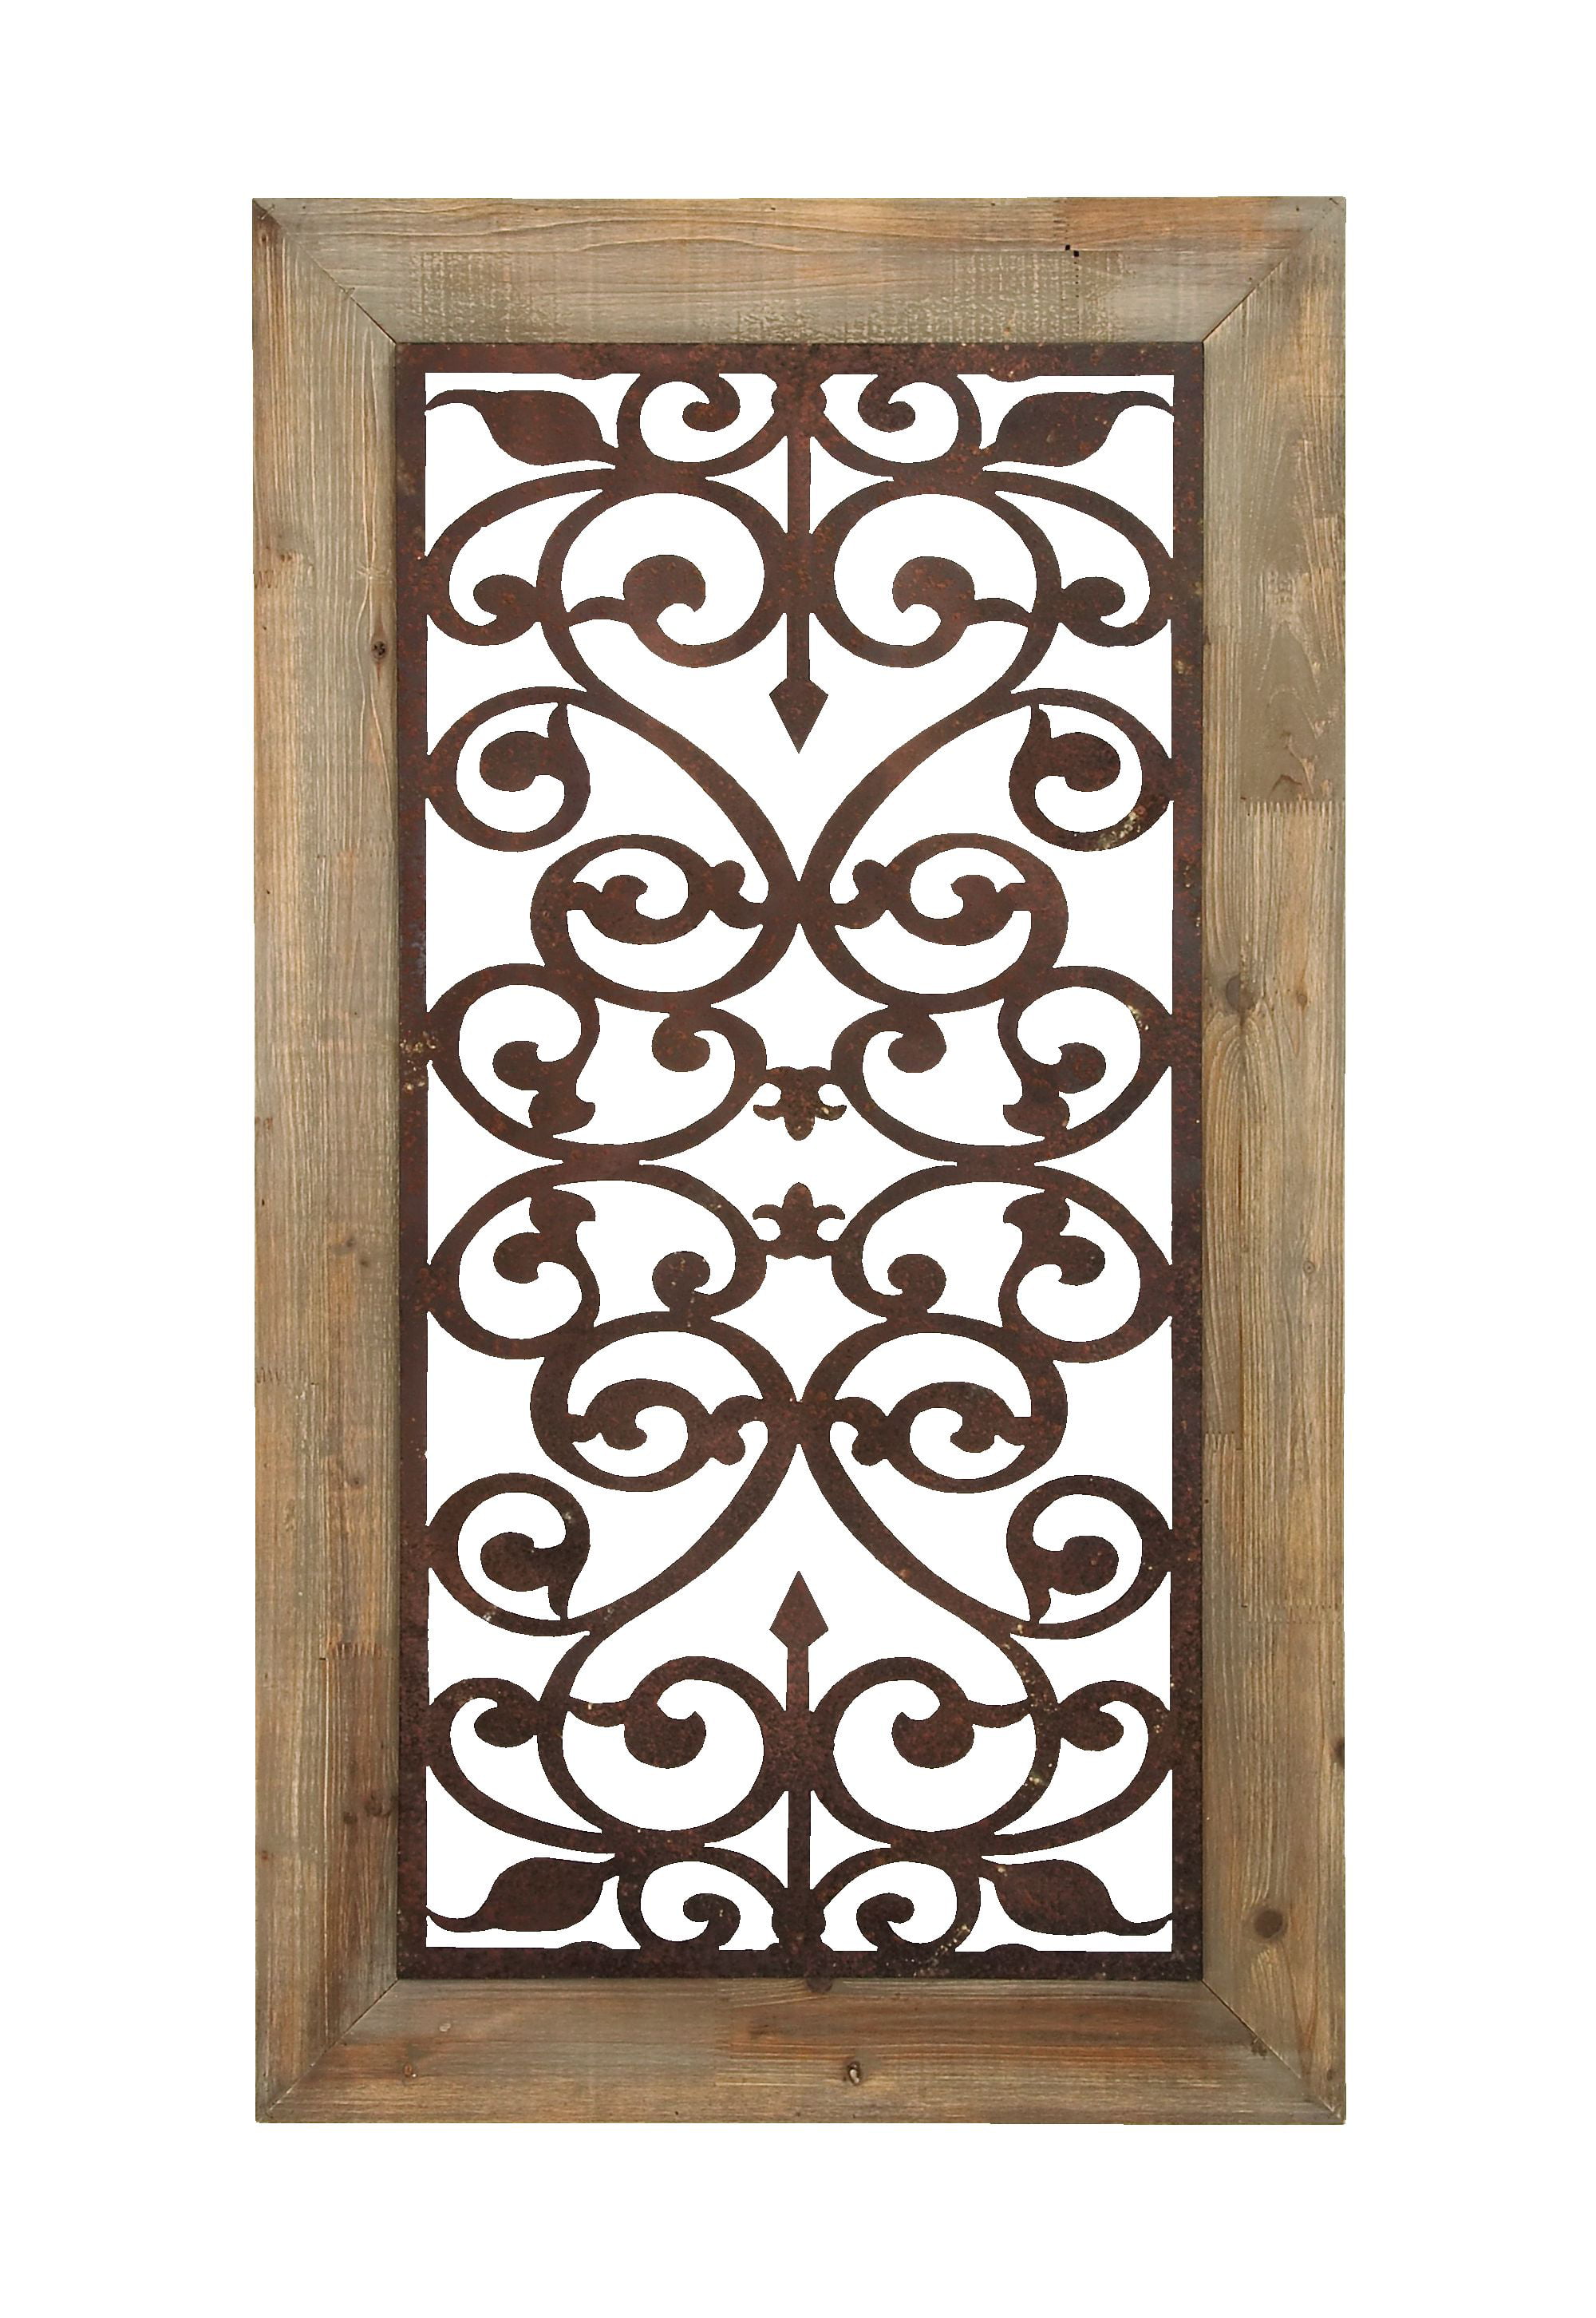 Brown/White Deco 79 59476 Wood and Metal Wall Sign 12 x 24